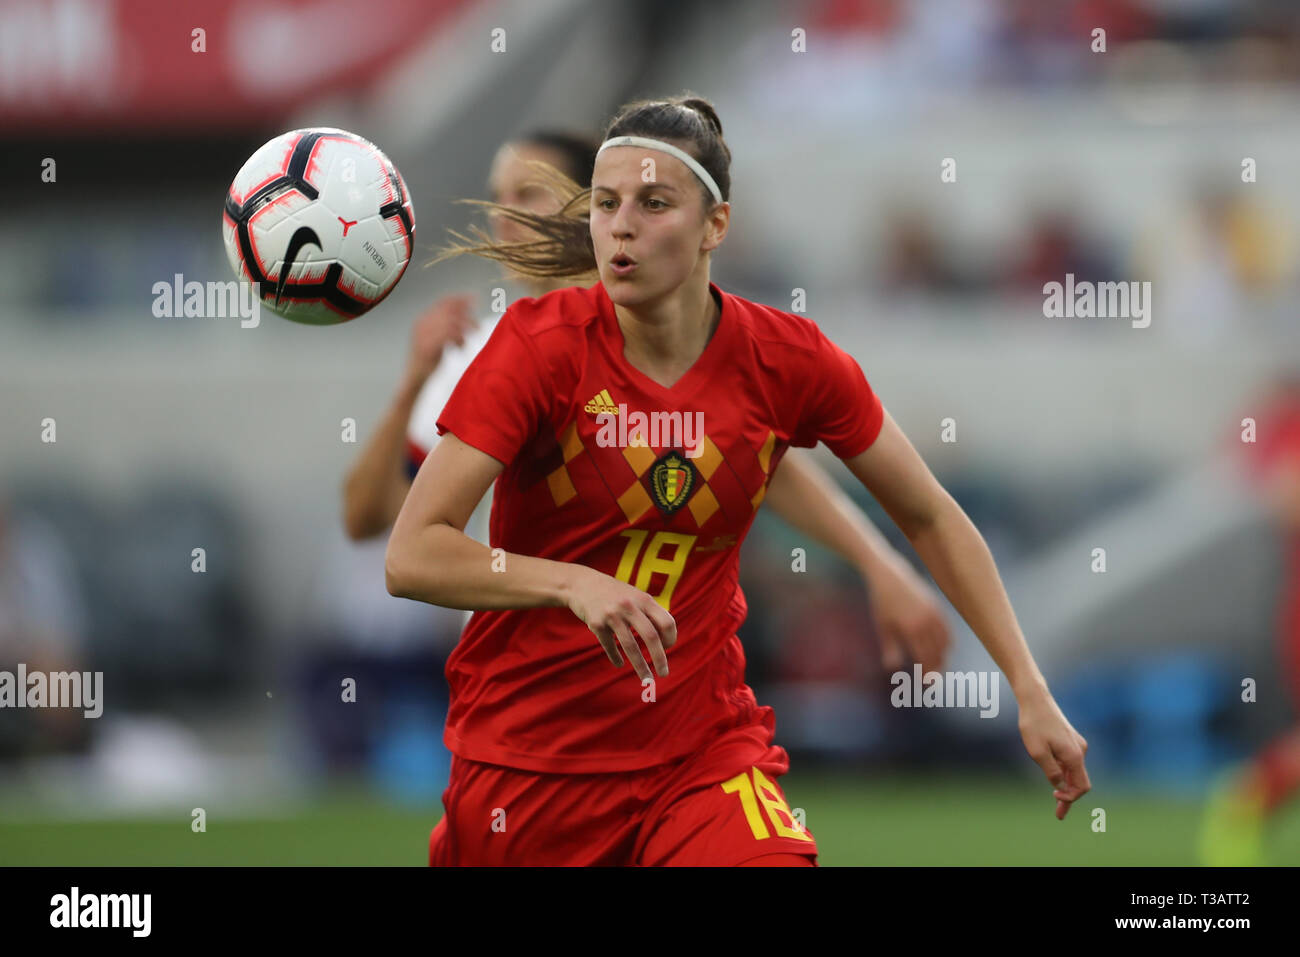 April 7, 2019:Belgium defender Laura De Neve (18) tries to chase down the pass in the first half during the game between Belgium and USA at Banc of California Stadium in Los Angeles, CA. USA. (Photo by Peter Joneleit) Stock Photo